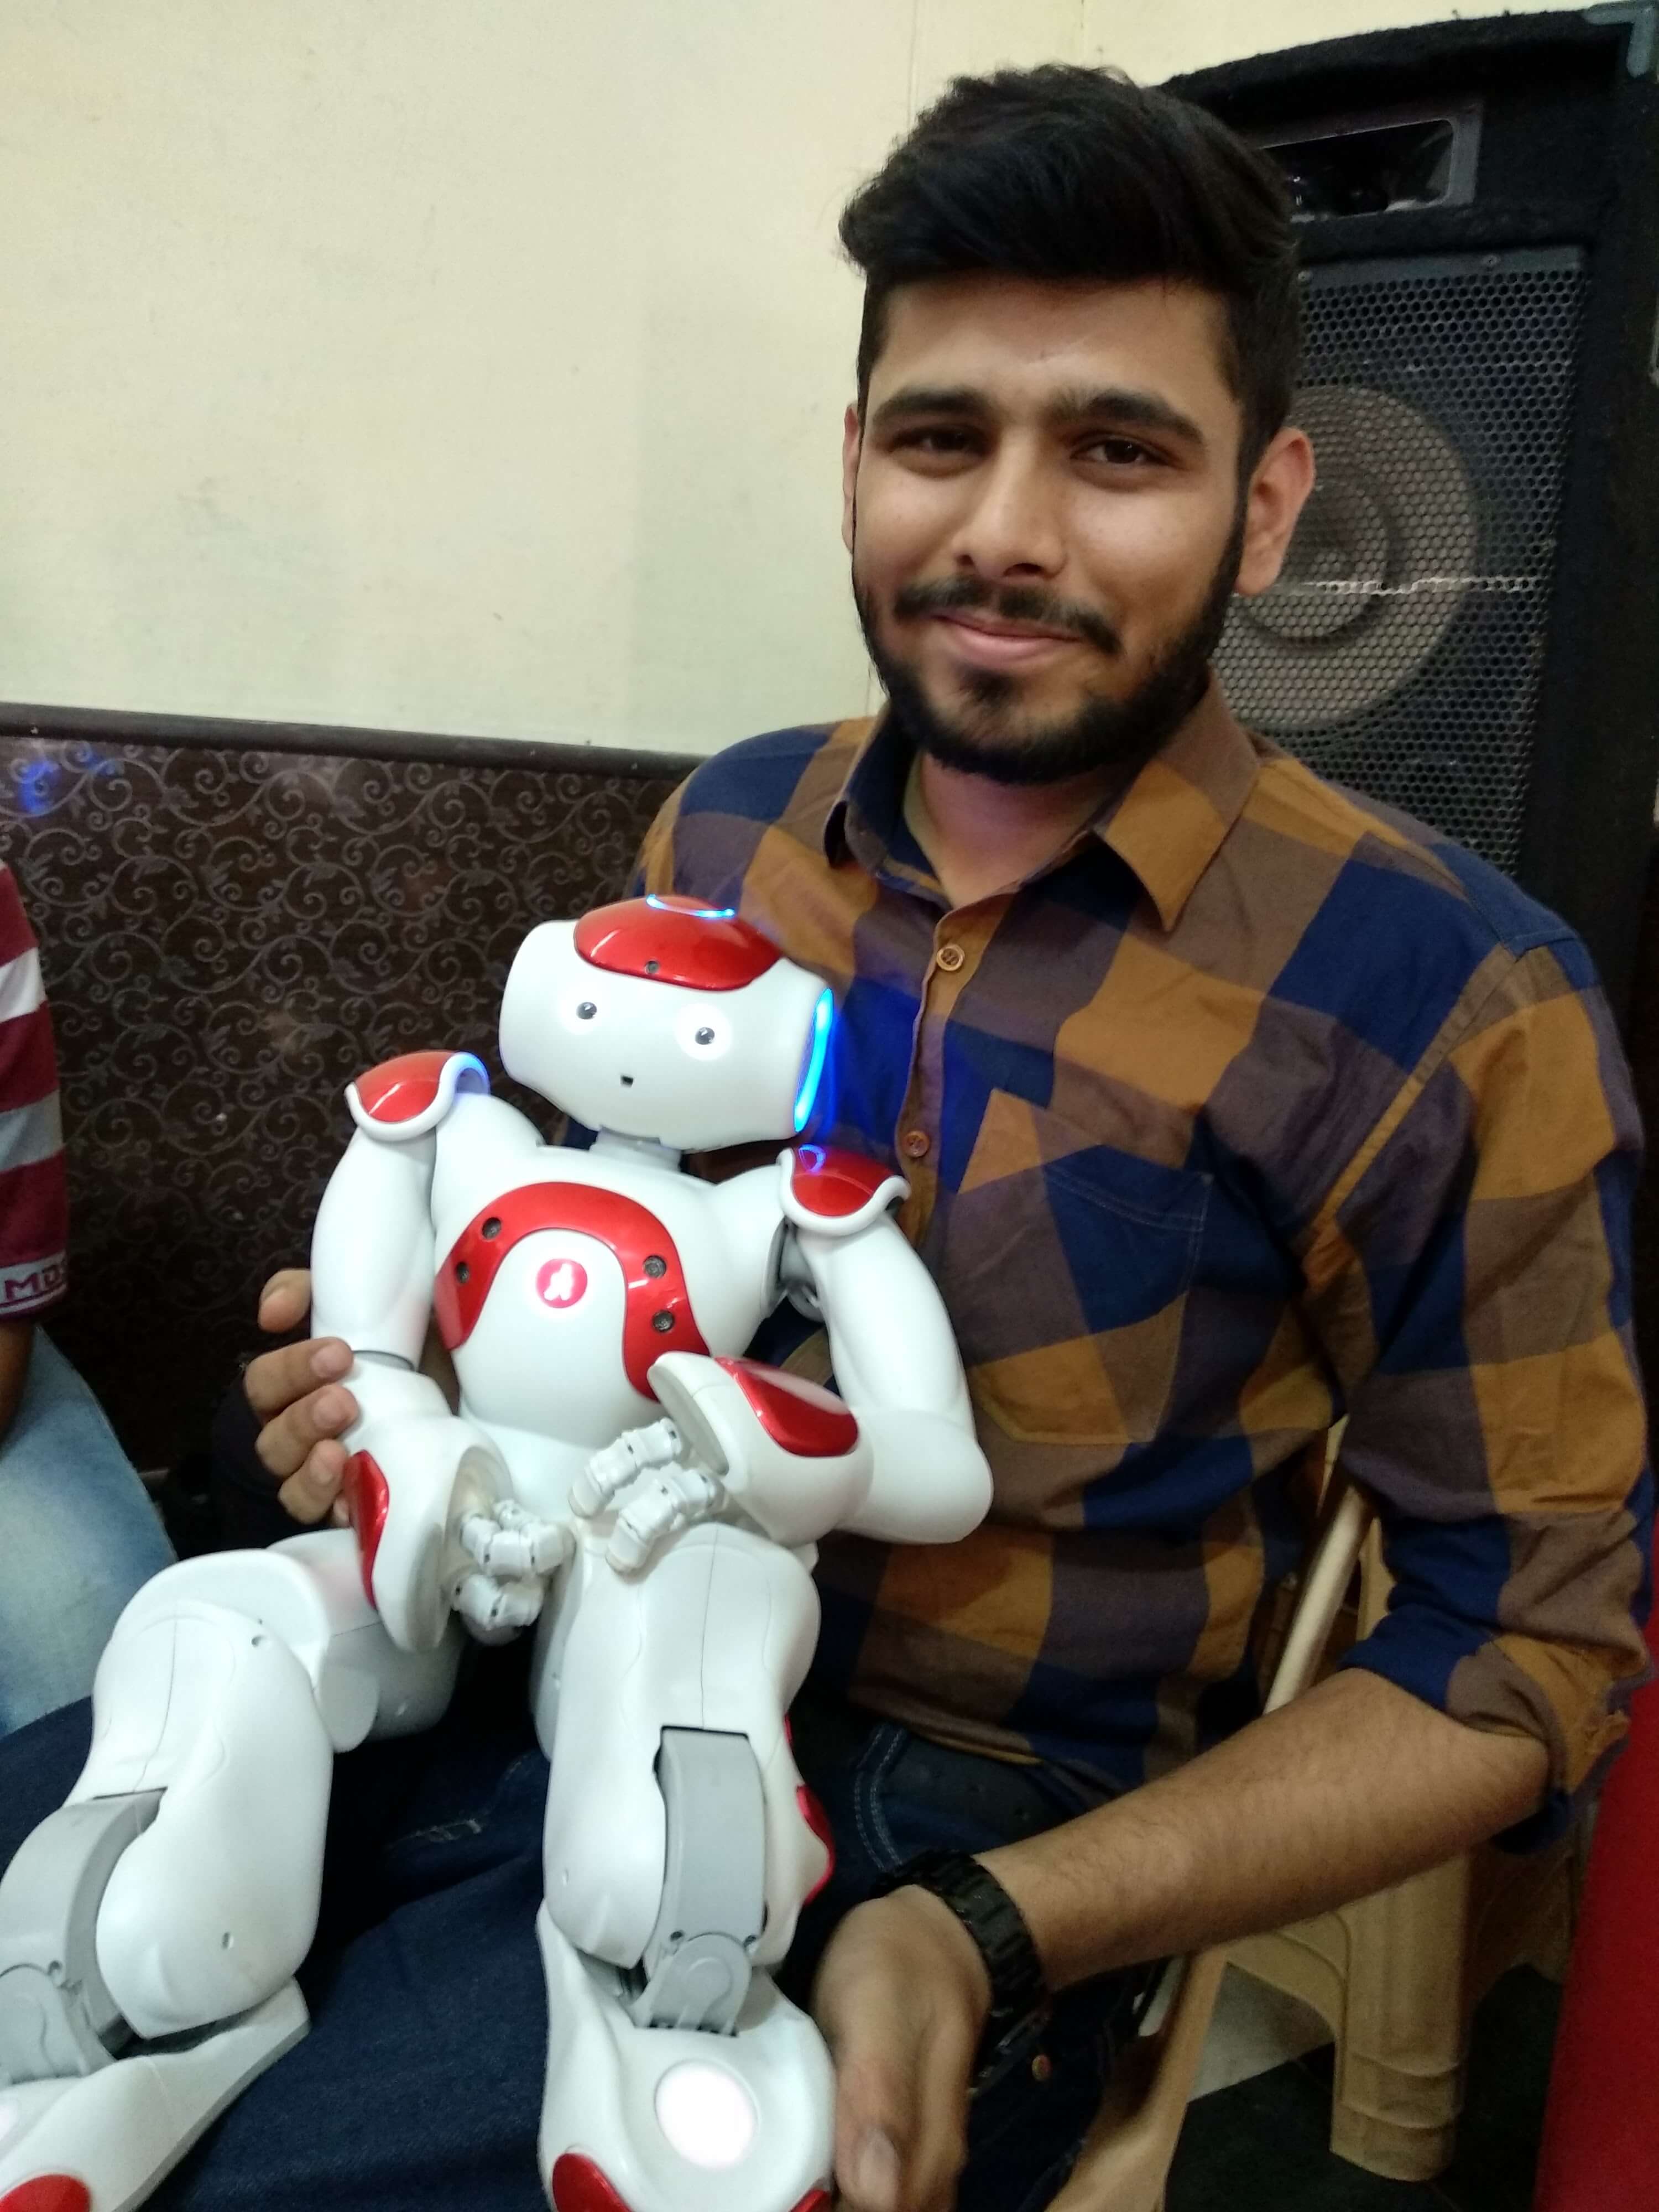 Ritwik Holding Nao Robot like a Baby